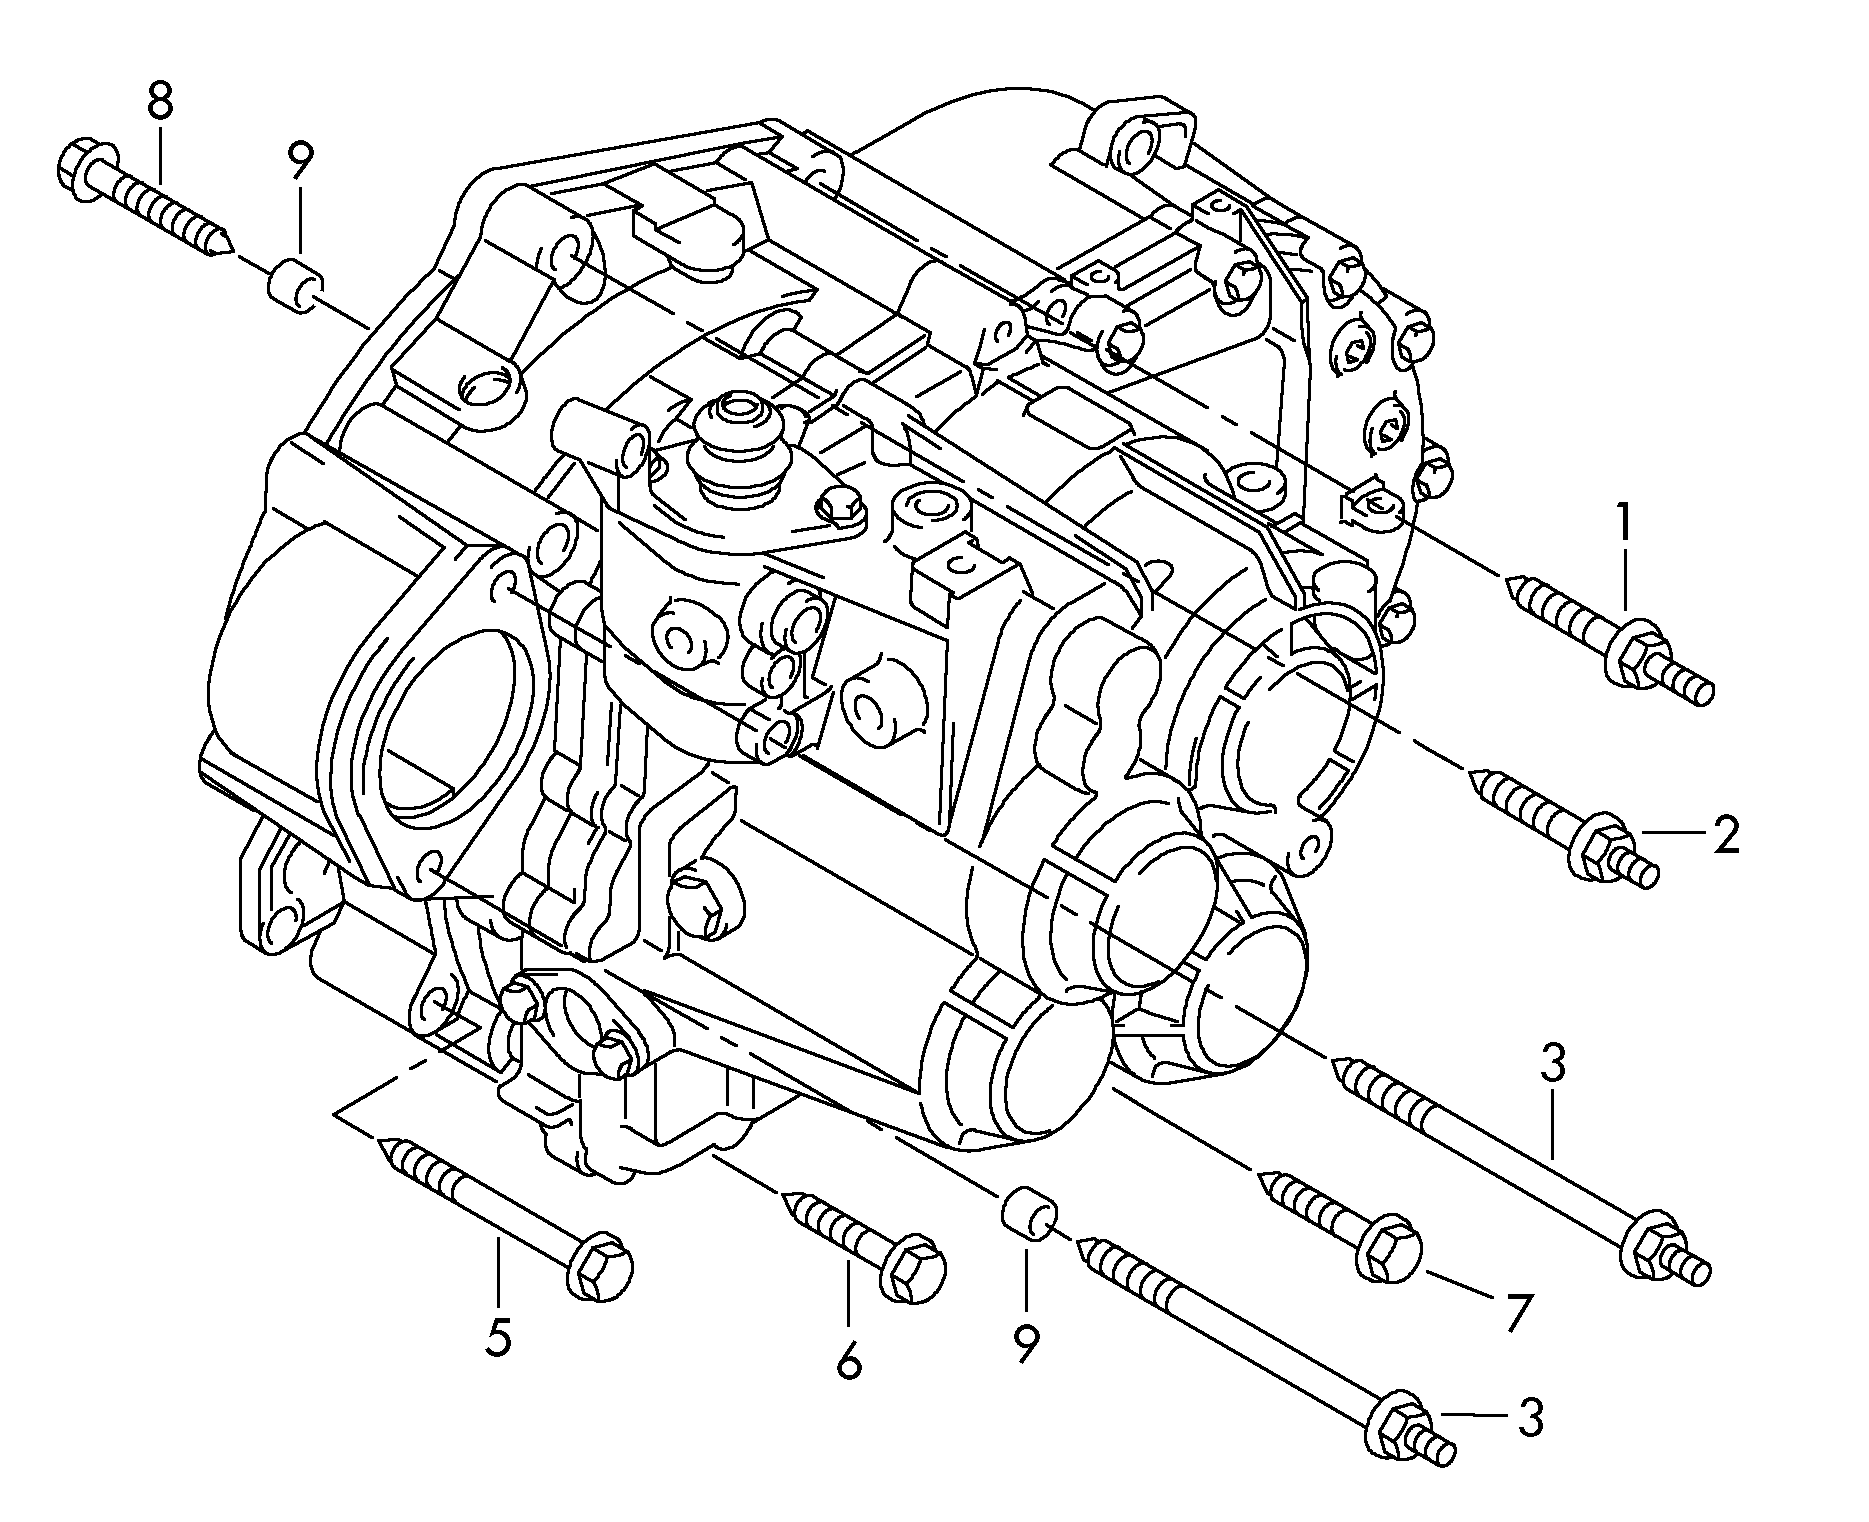 mounting parts for engine and<br>transmissionfor 6 speed manual gearbox  - Octavia - oct